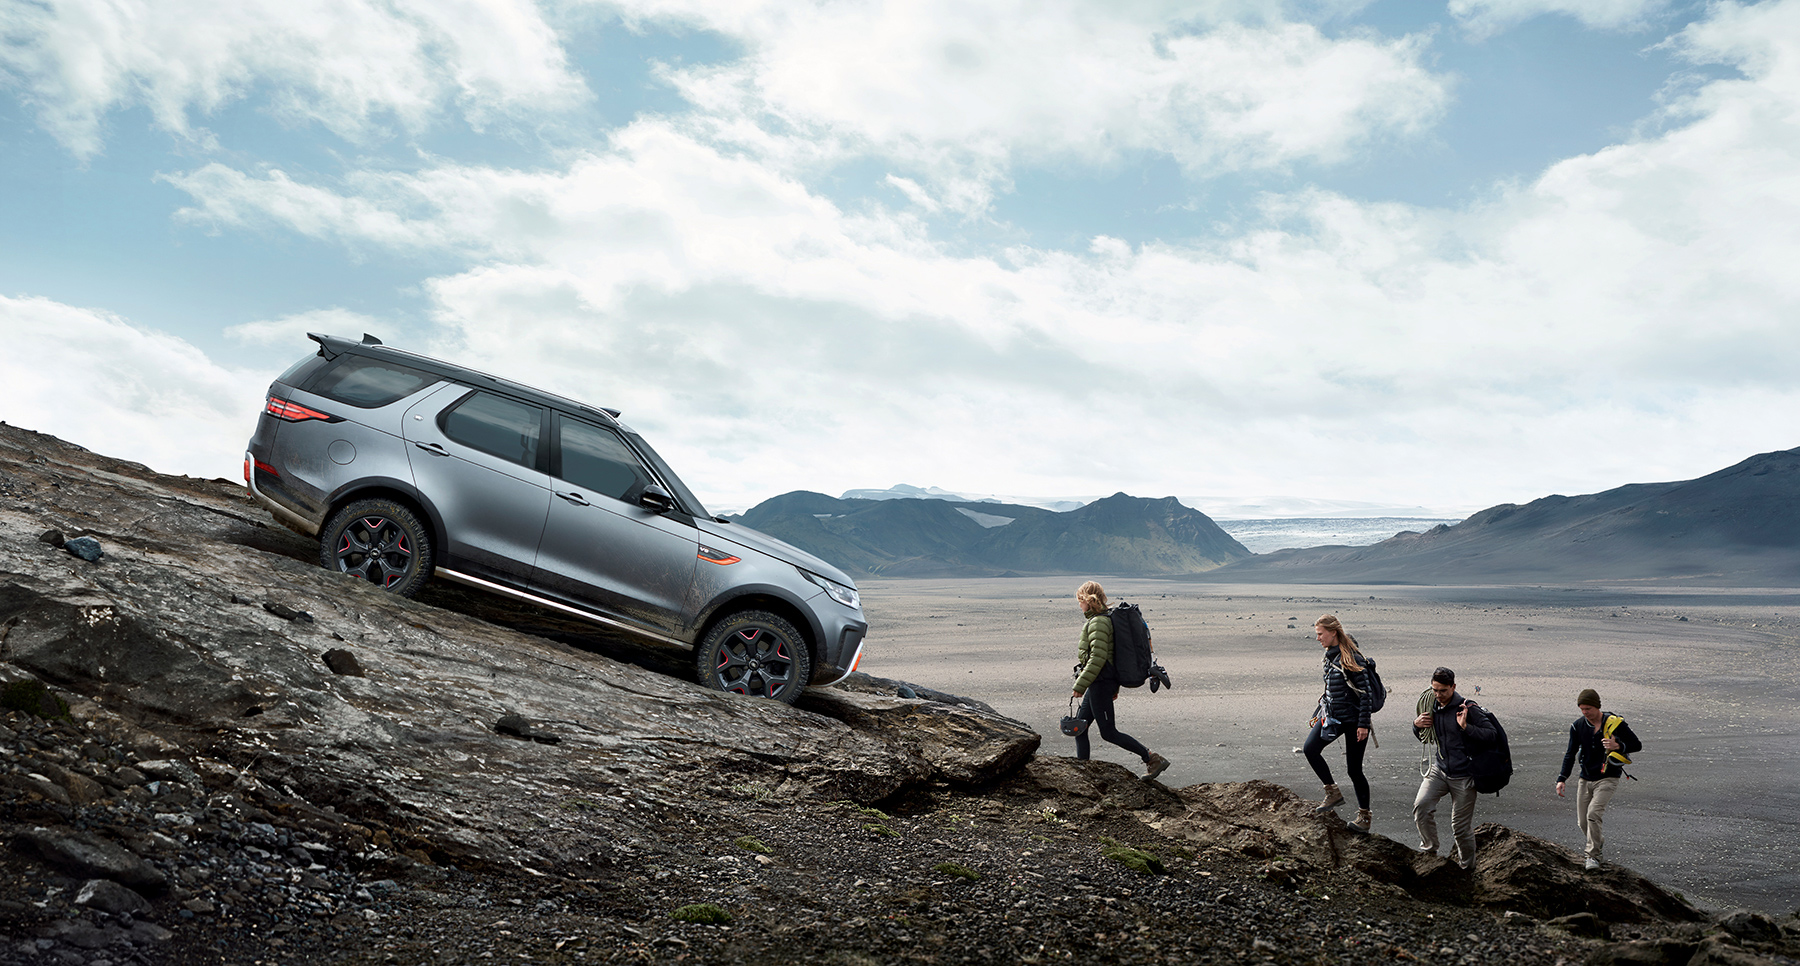 Trigger Shoots Land Rover Discovery Iceland photoshoot